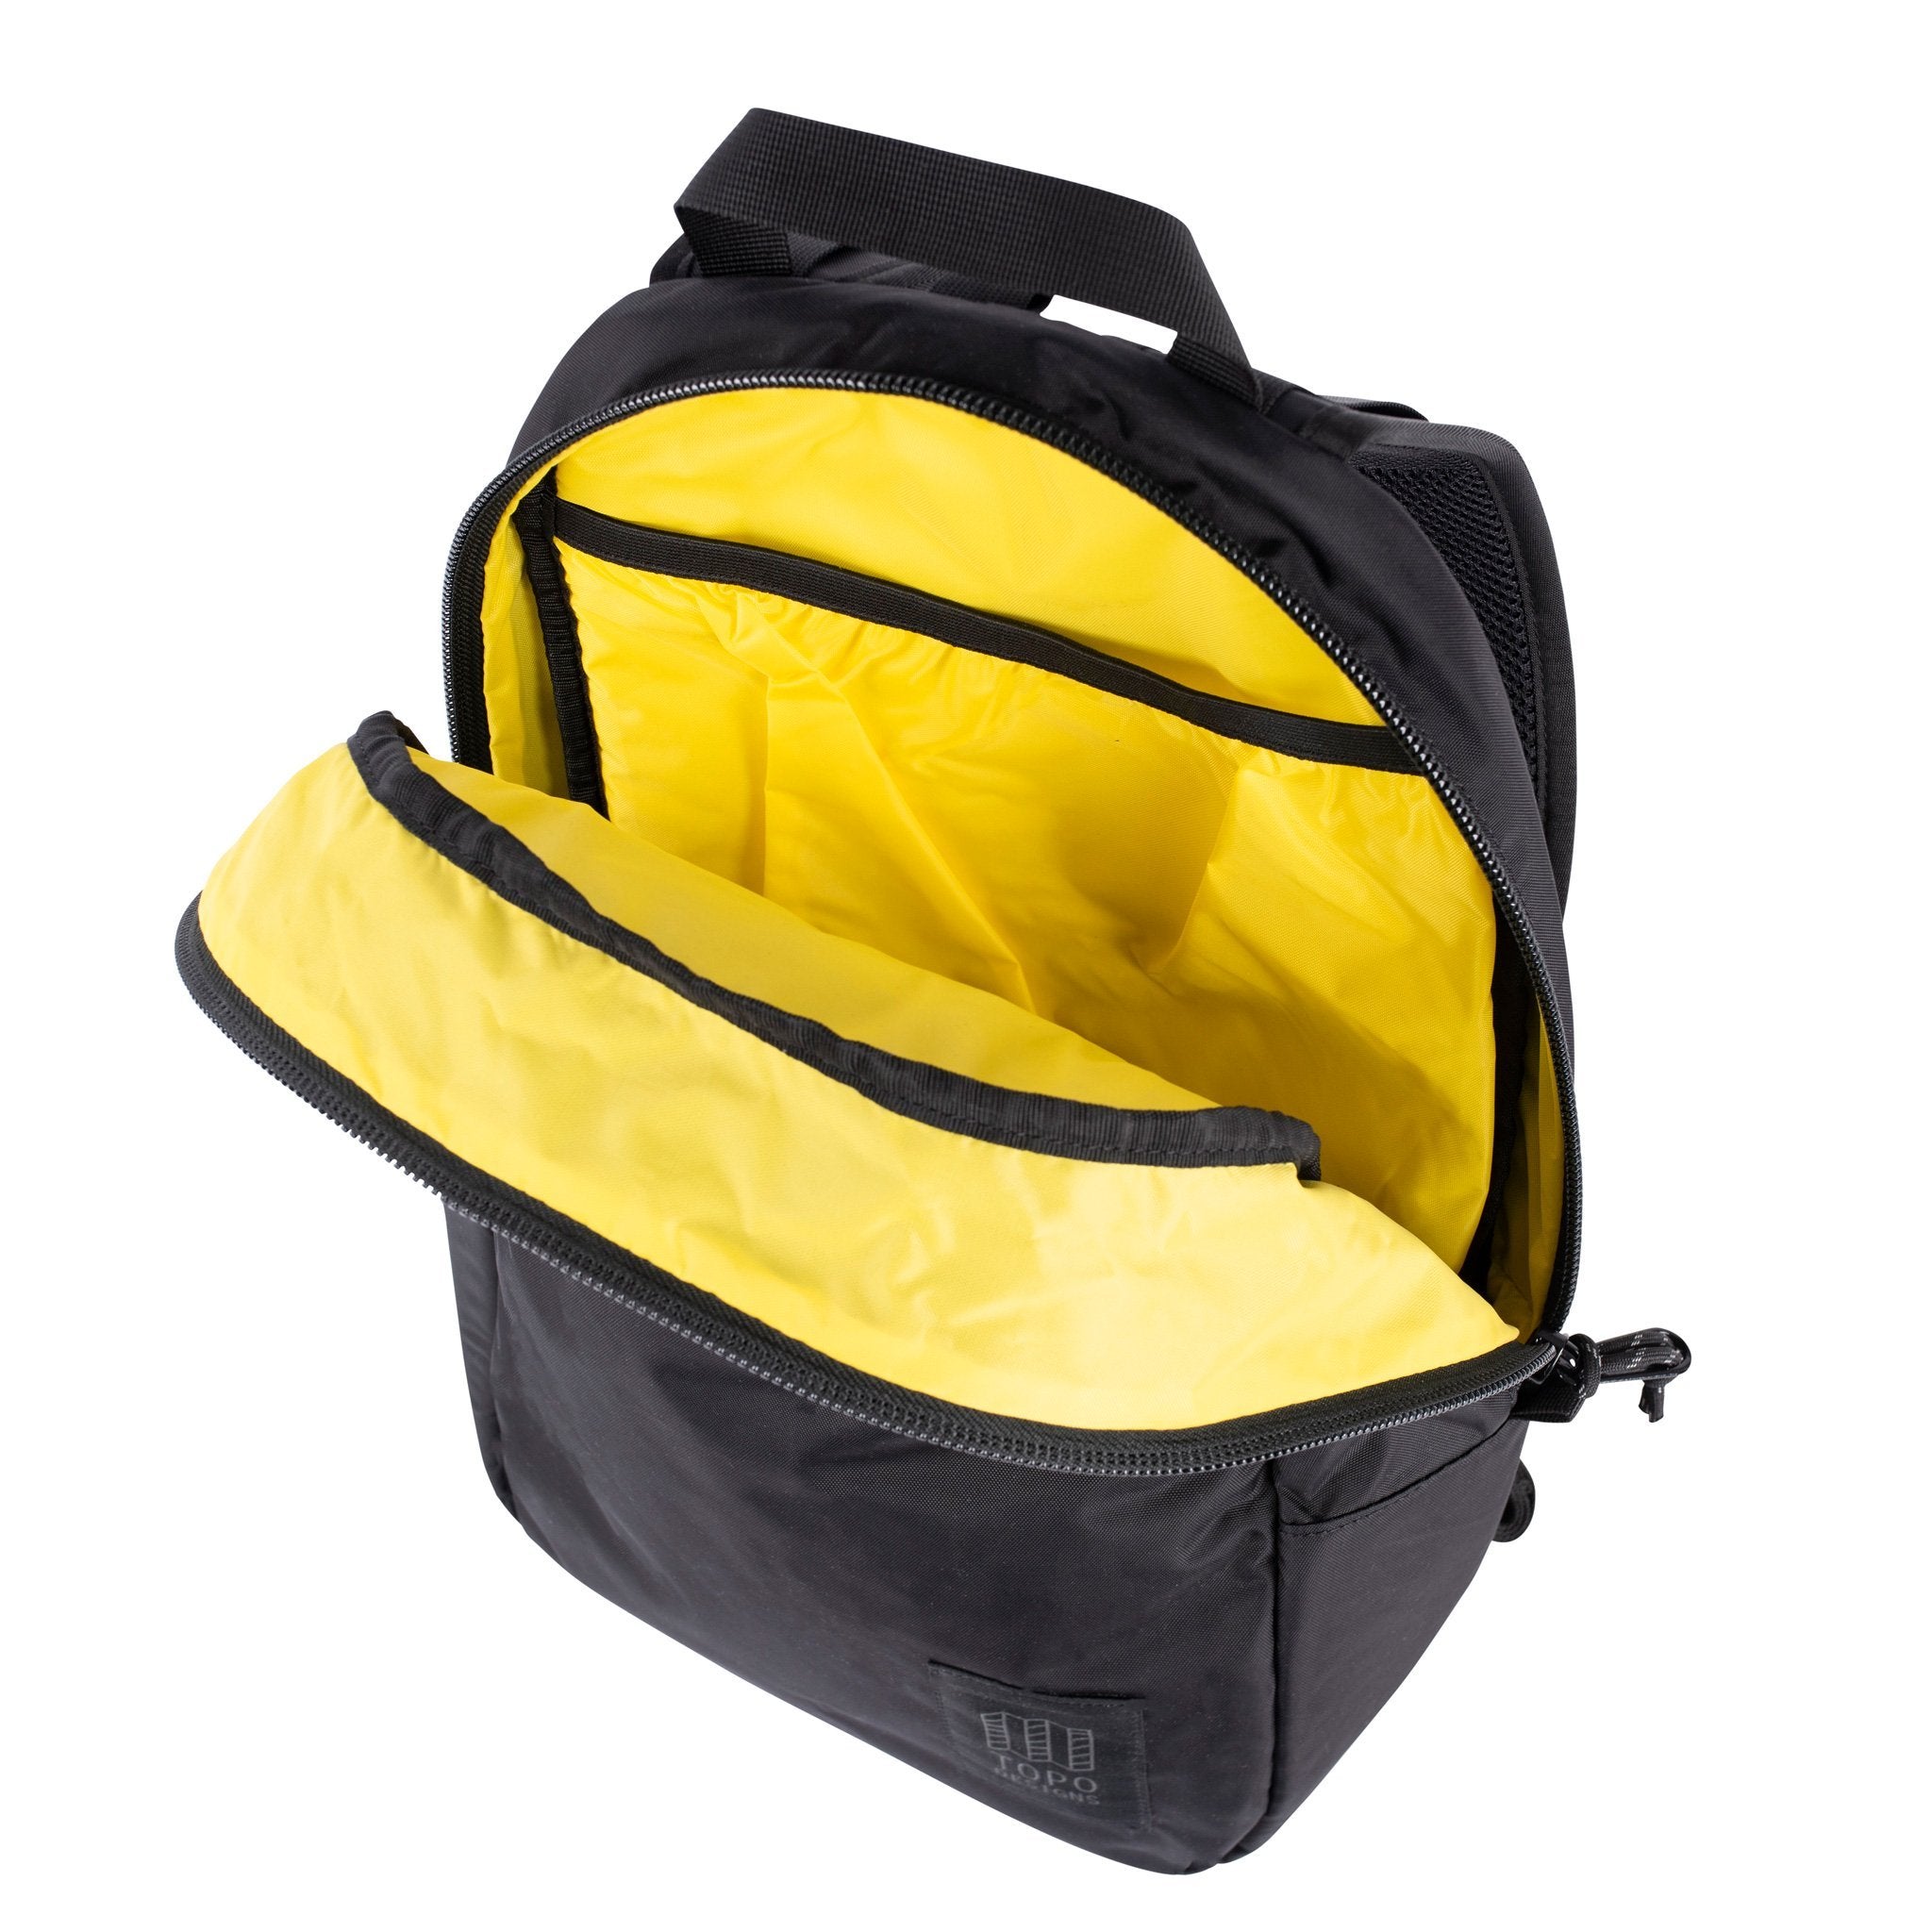 Detail product shot of Light Pack in Black/Black showing yellow lining and laptop sleeve.